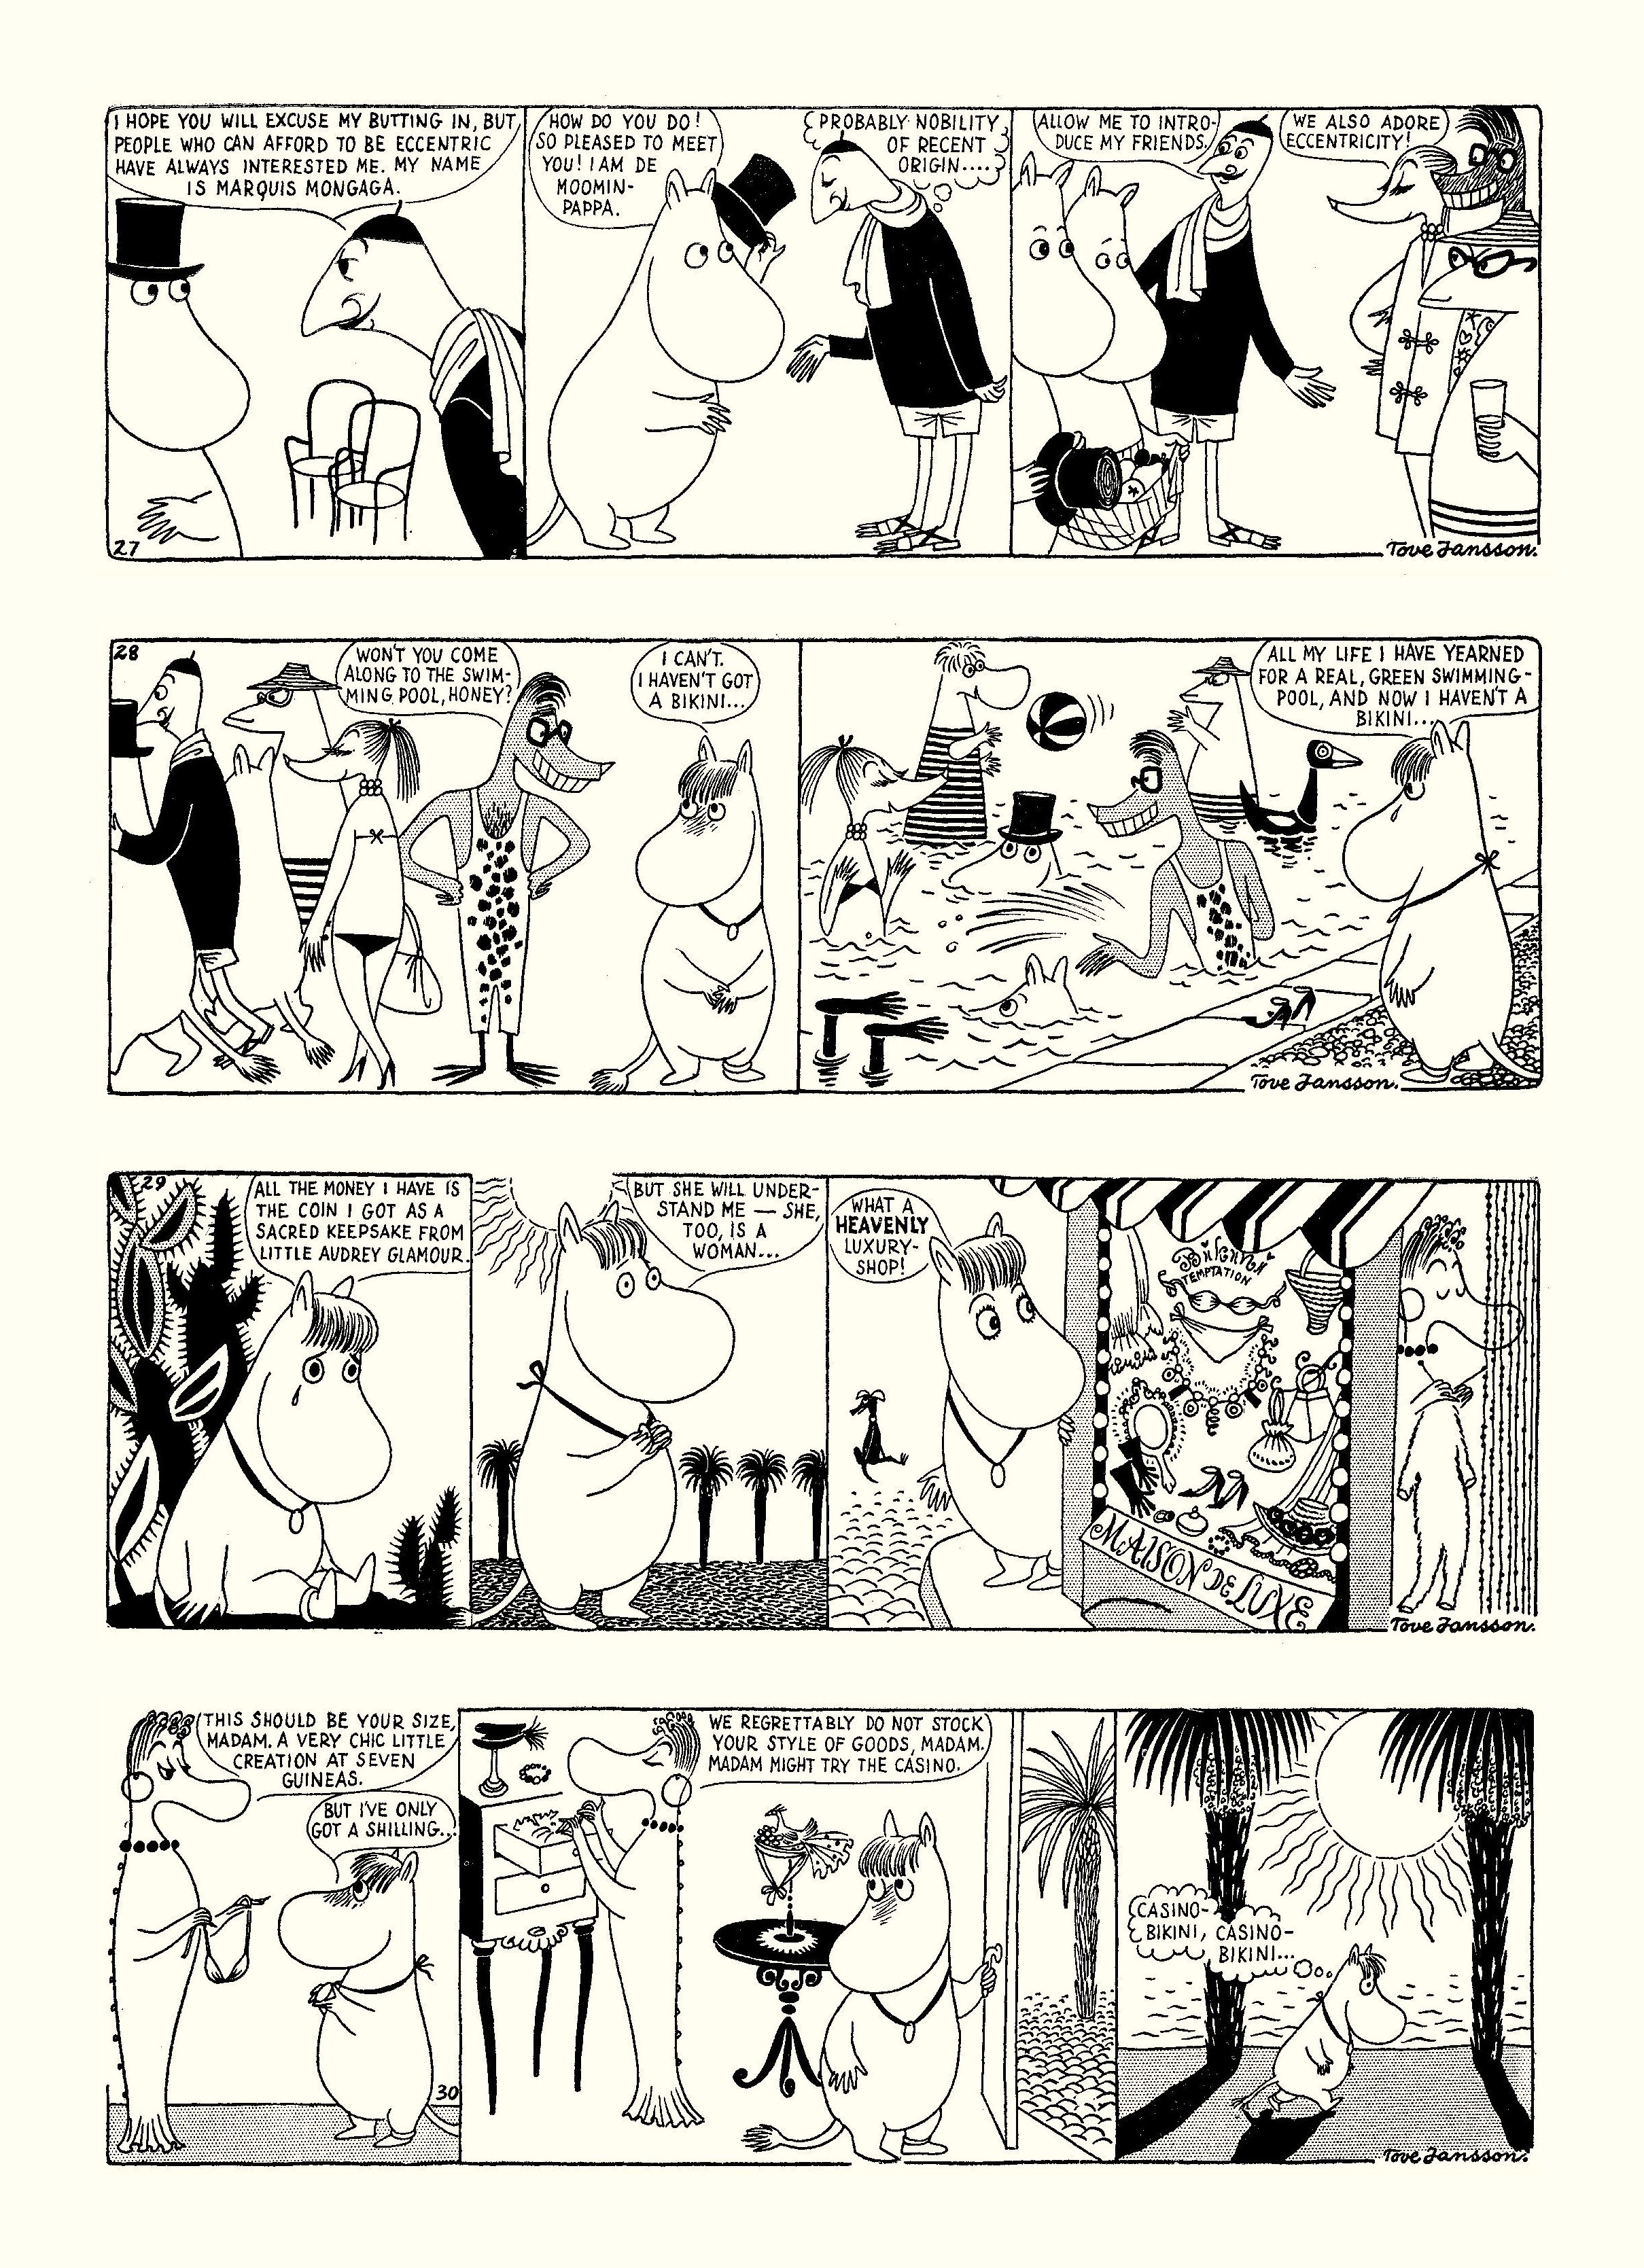 Read online Moomin: The Complete Tove Jansson Comic Strip comic -  Issue # TPB 1 - 55